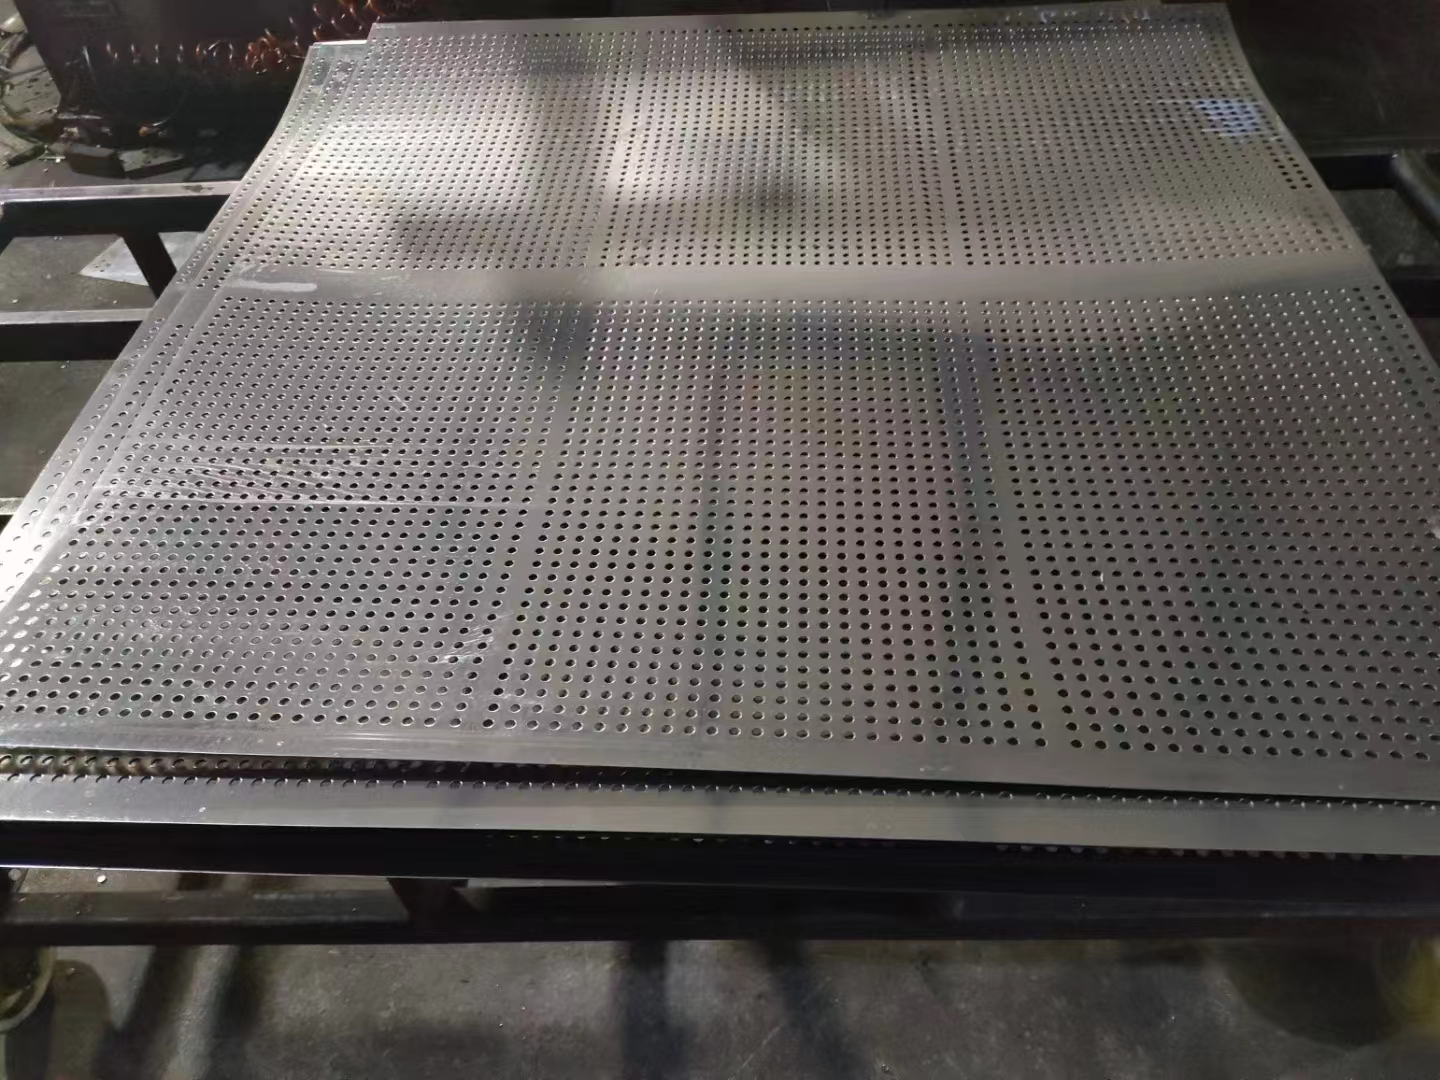 Small hole perforated metal perforated stainless steel sheet perforated metal sheet for fencing